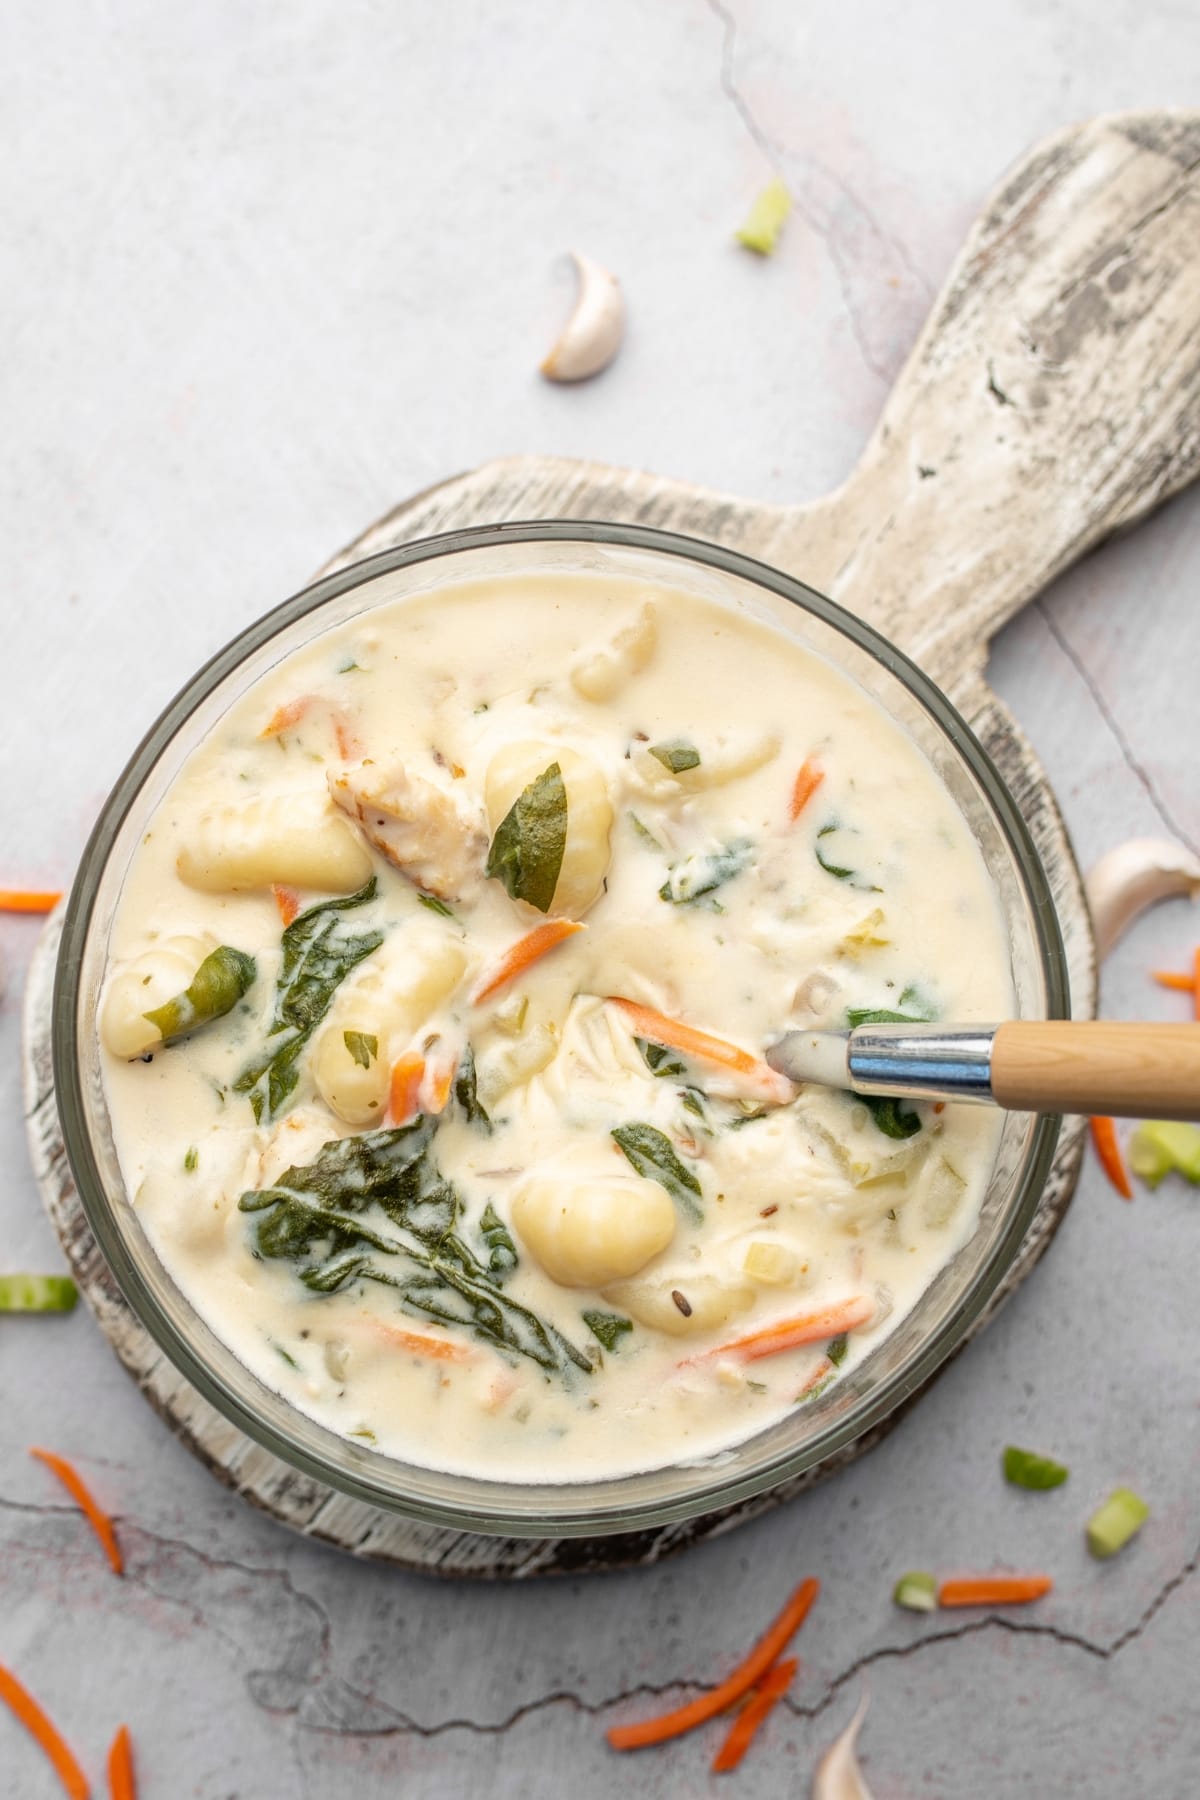 Hearty and Comforting Chicken and Gnocchi Soup with Baby spinach and Carrots in a Bowl with a Spoon